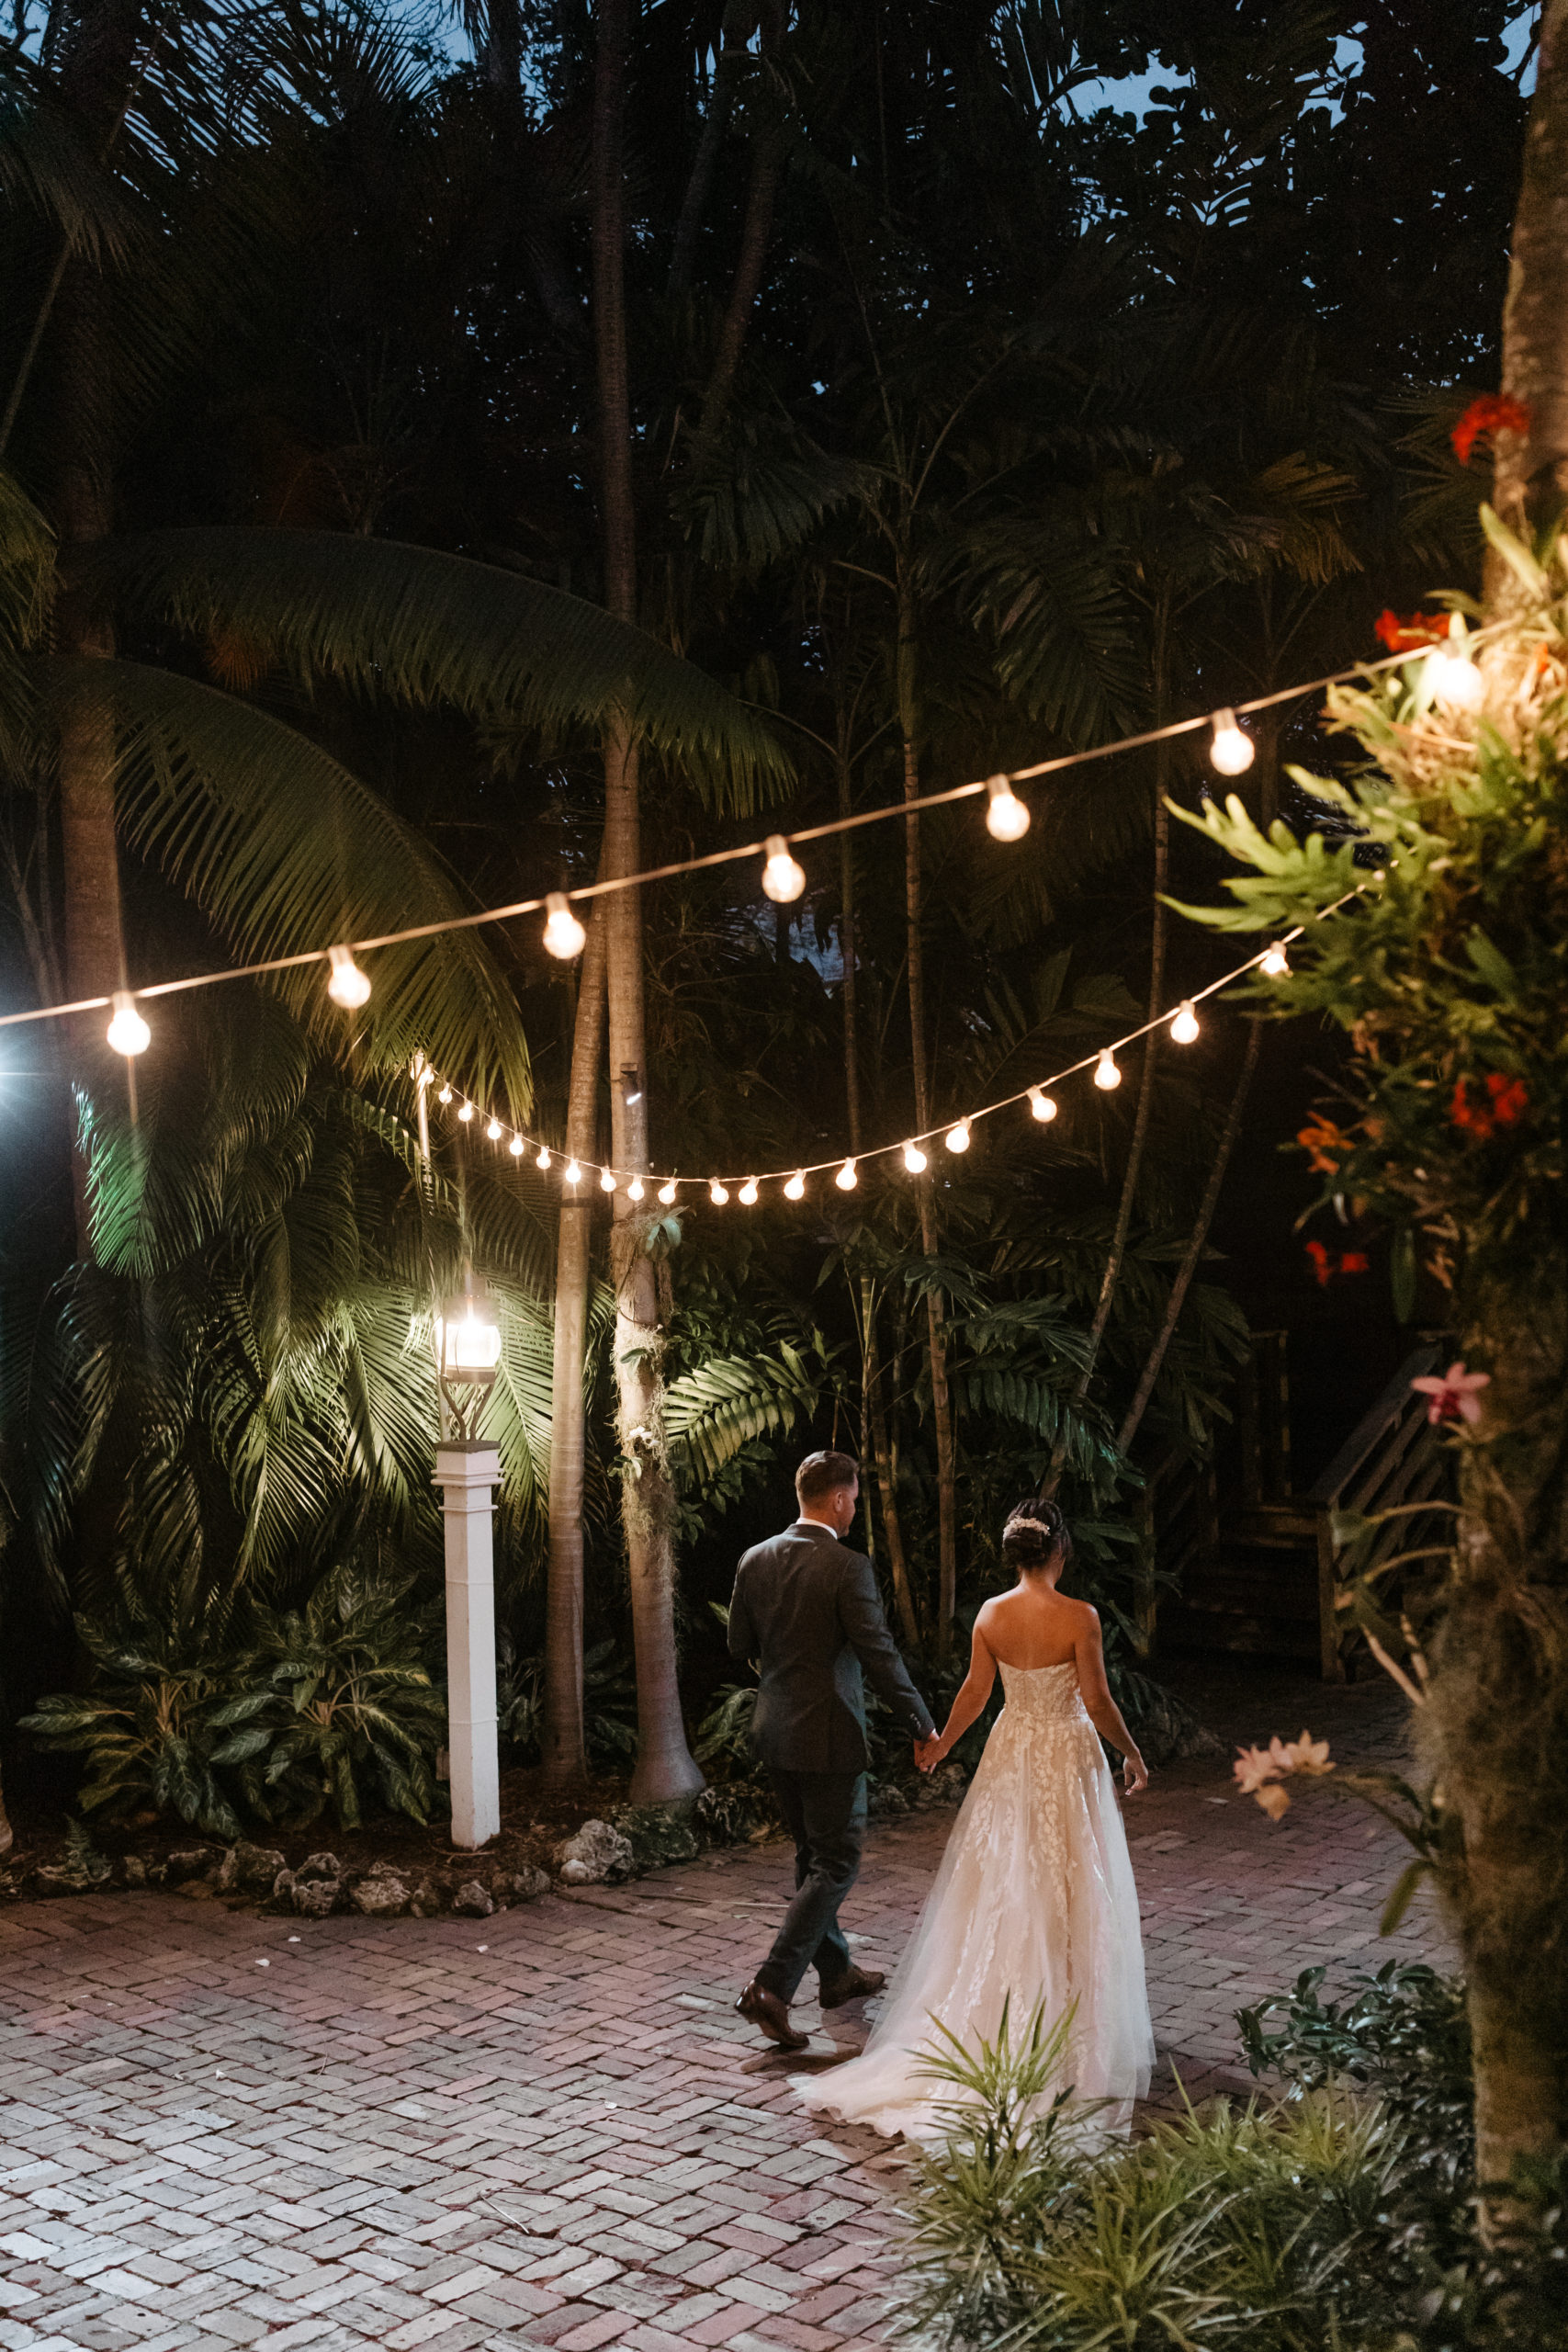 the Key West photographer captures the bride and groom walking away at the end of their wedding day